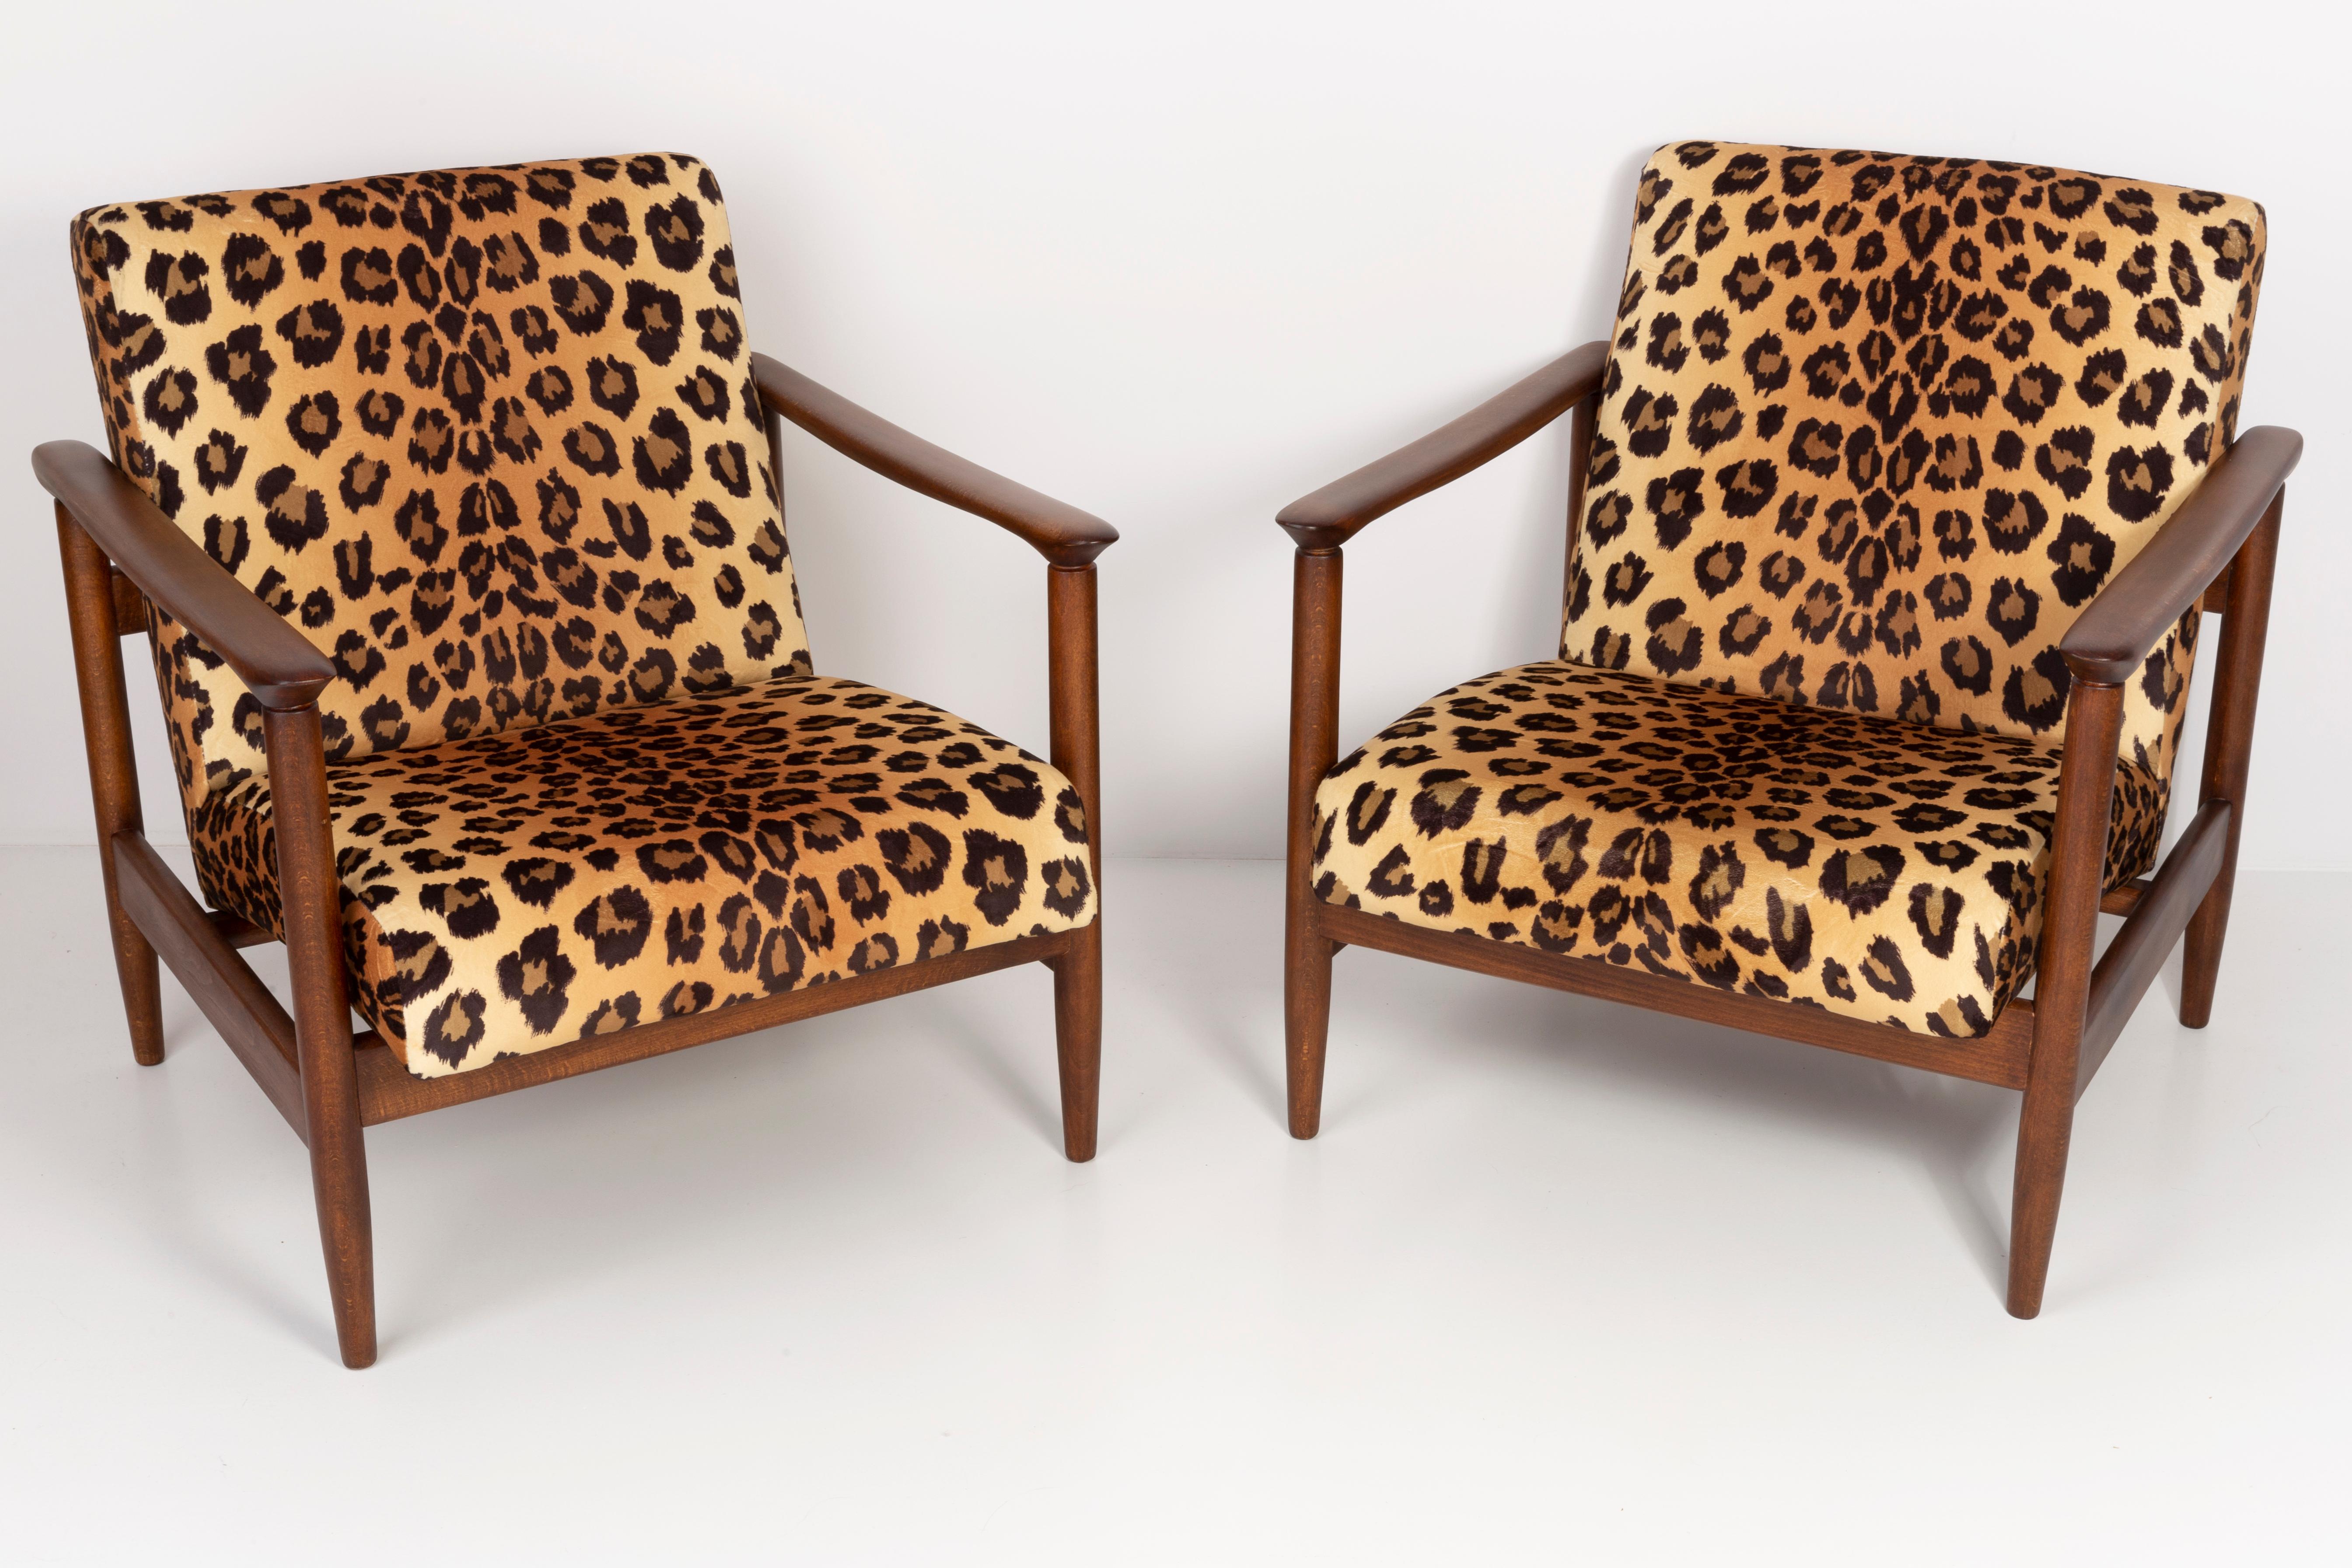 Set of 4 armchairs GFM-142 leopard armchairs, designed by Edmund Homa, a polish architect, designer of Industrial Design and interior architecture, professor at the Academy of Fine Arts in Gdansk.

The armchairs were made in the 1960s in the